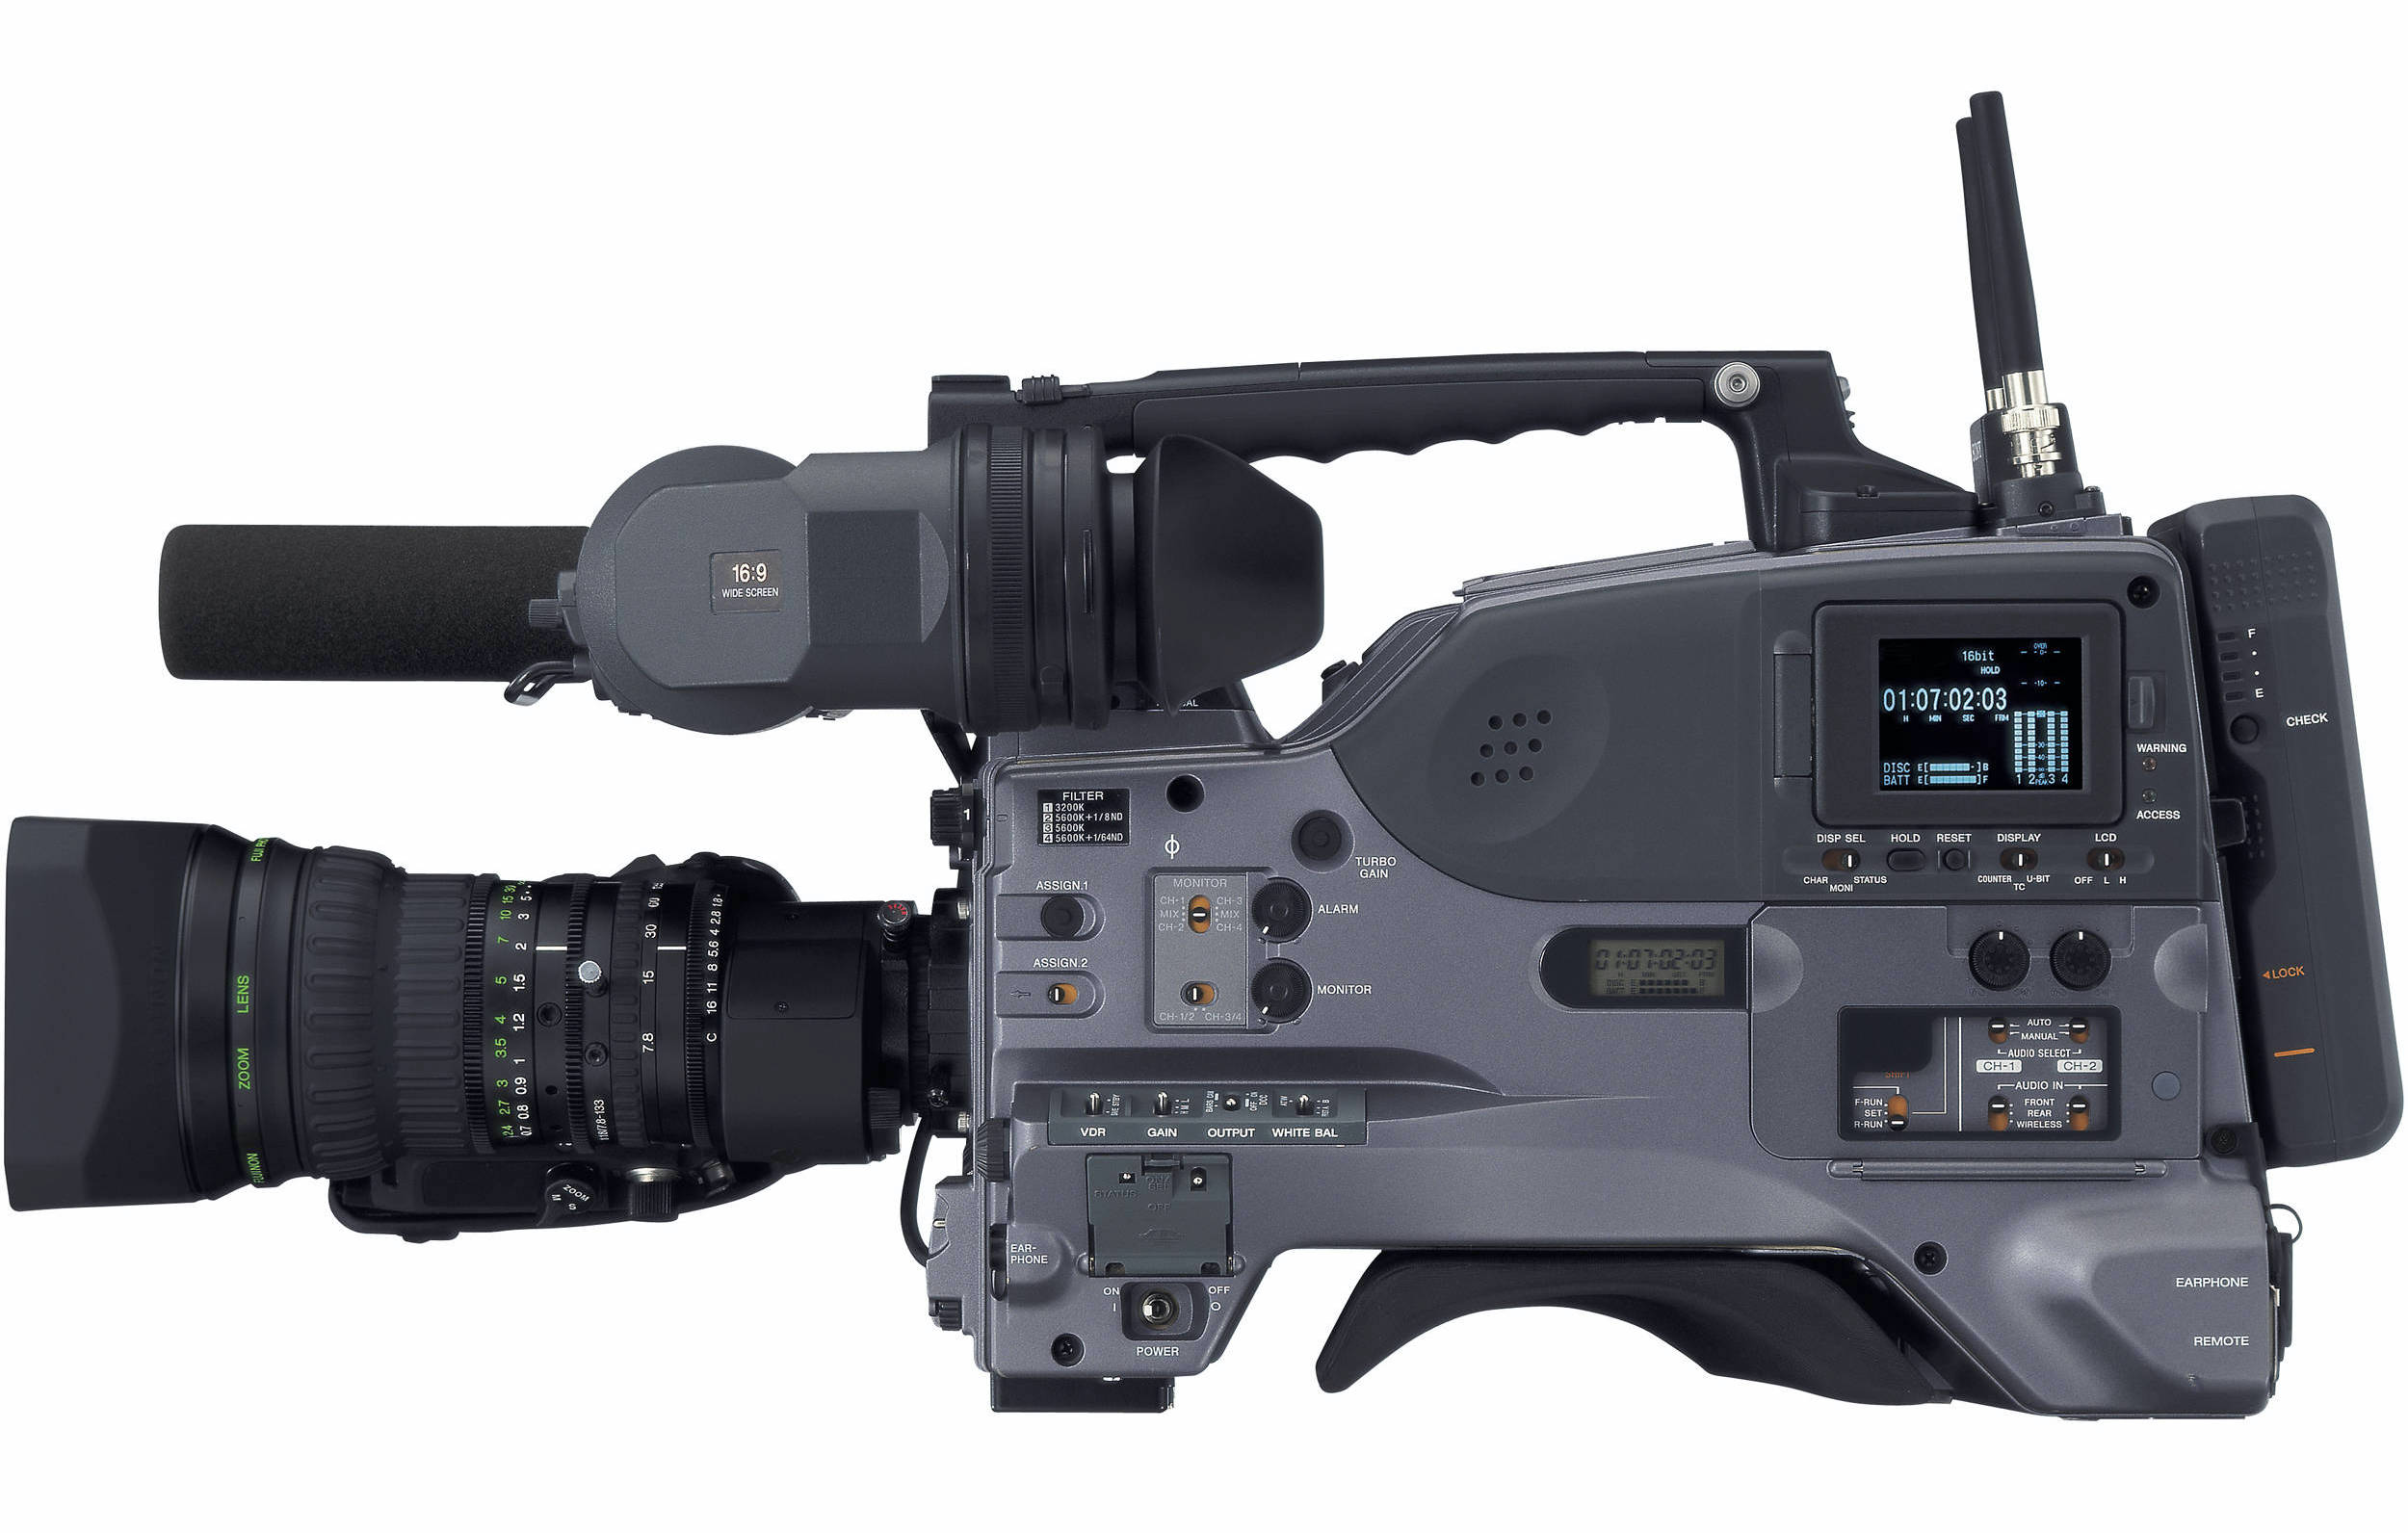 The PDW-510 XDCAM camcorder. Image: Sony.